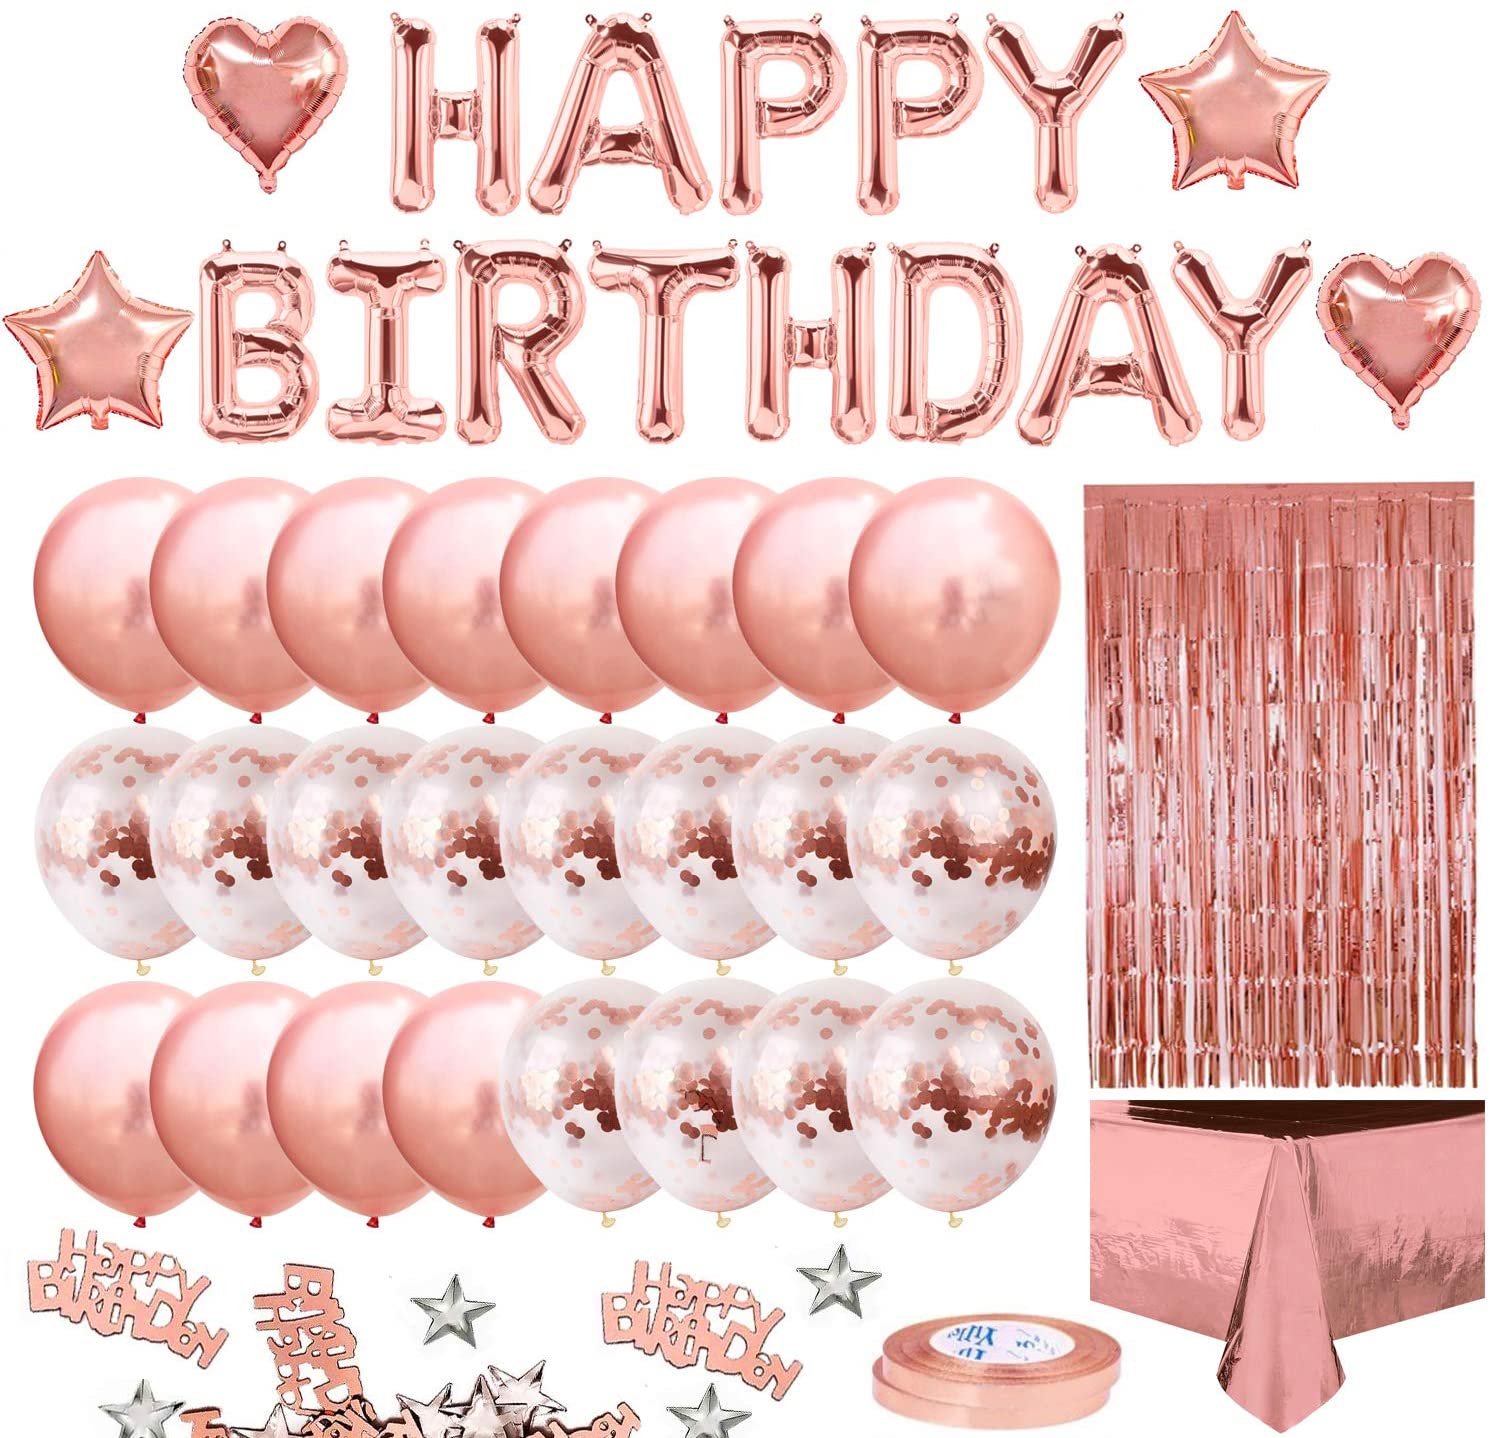 Rose Gold Birthday Party Decoration Banner Fringe Curtain Heart Star Foil Confetti Balloons